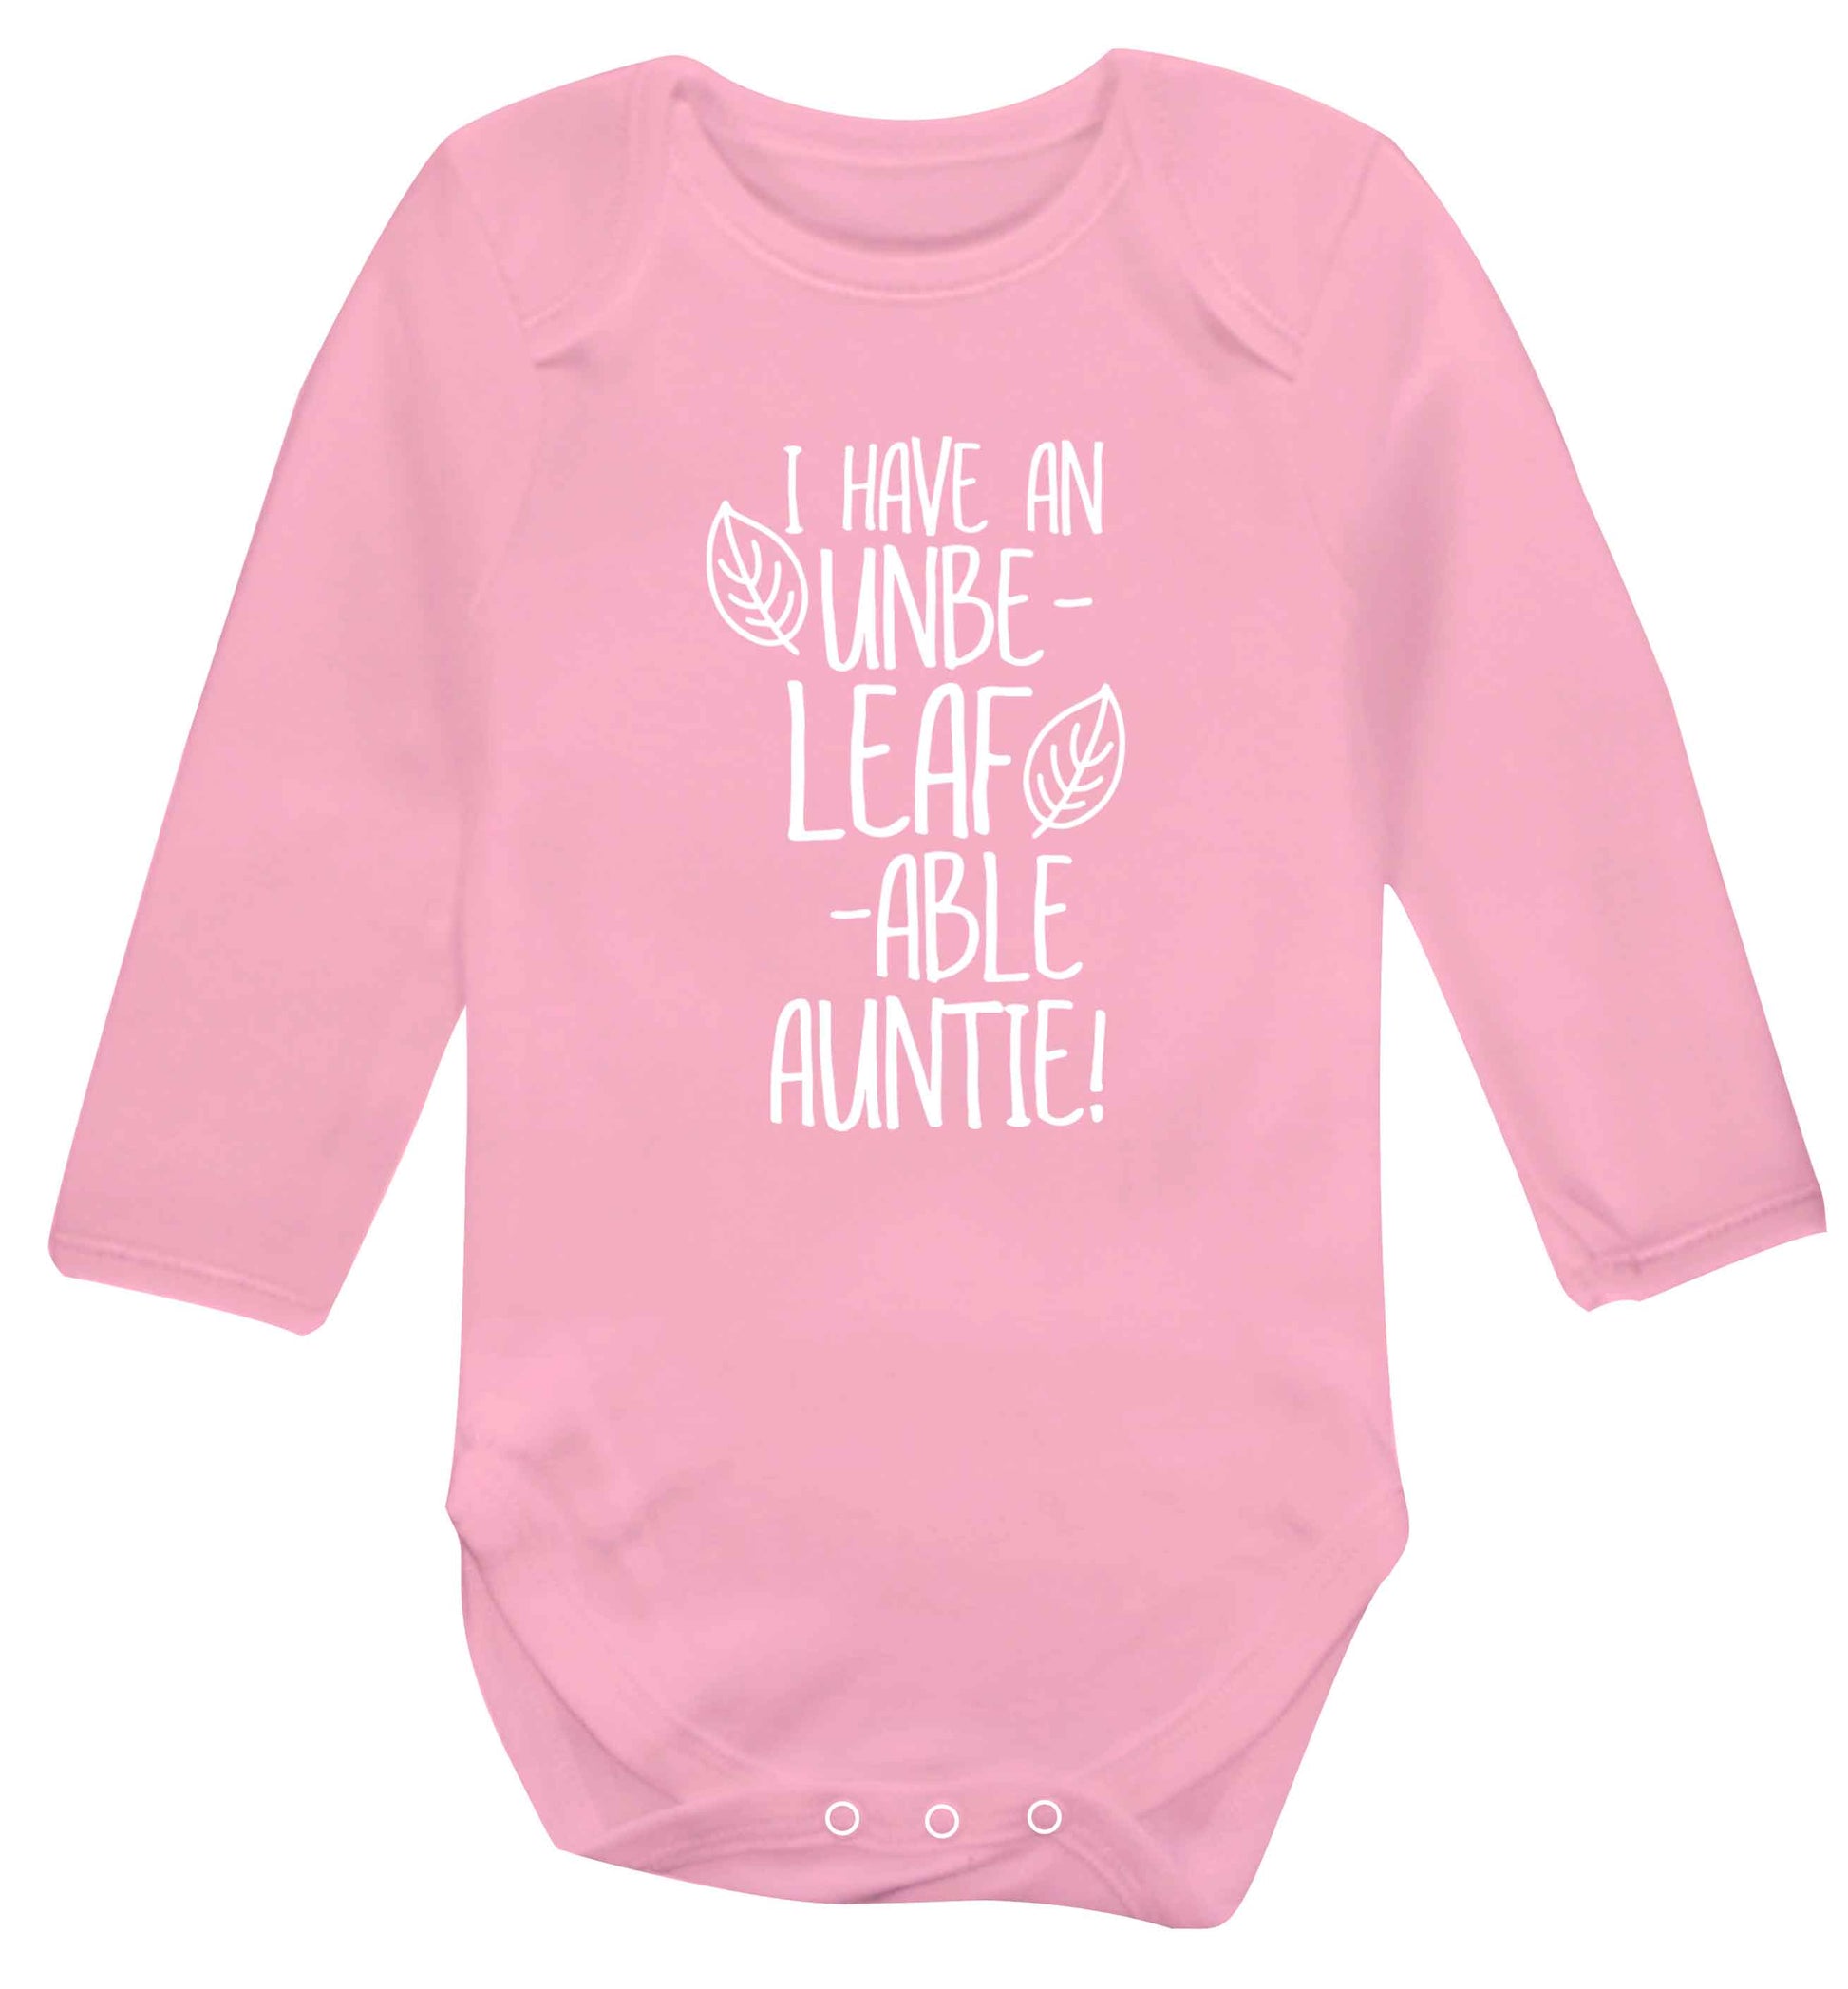 I have an unbe-leaf-able auntie Baby Vest long sleeved pale pink 6-12 months